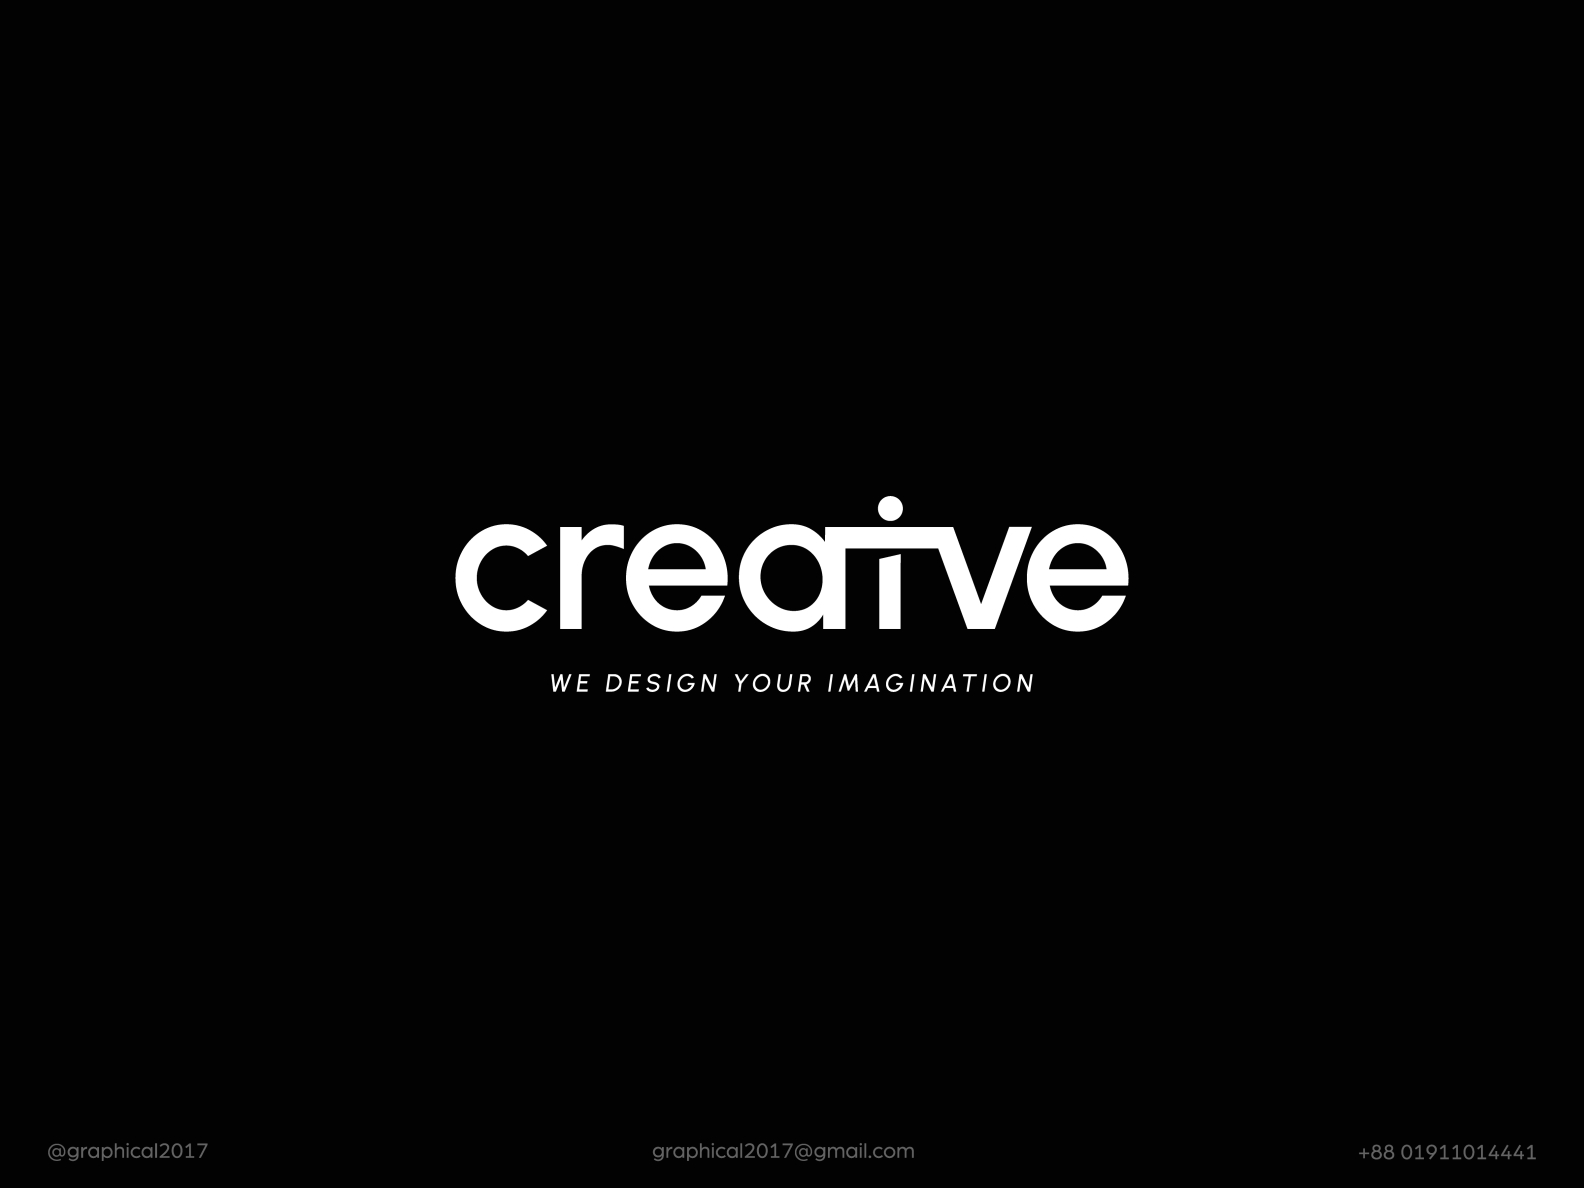 creative by GRAPHICAL™ on Dribbble